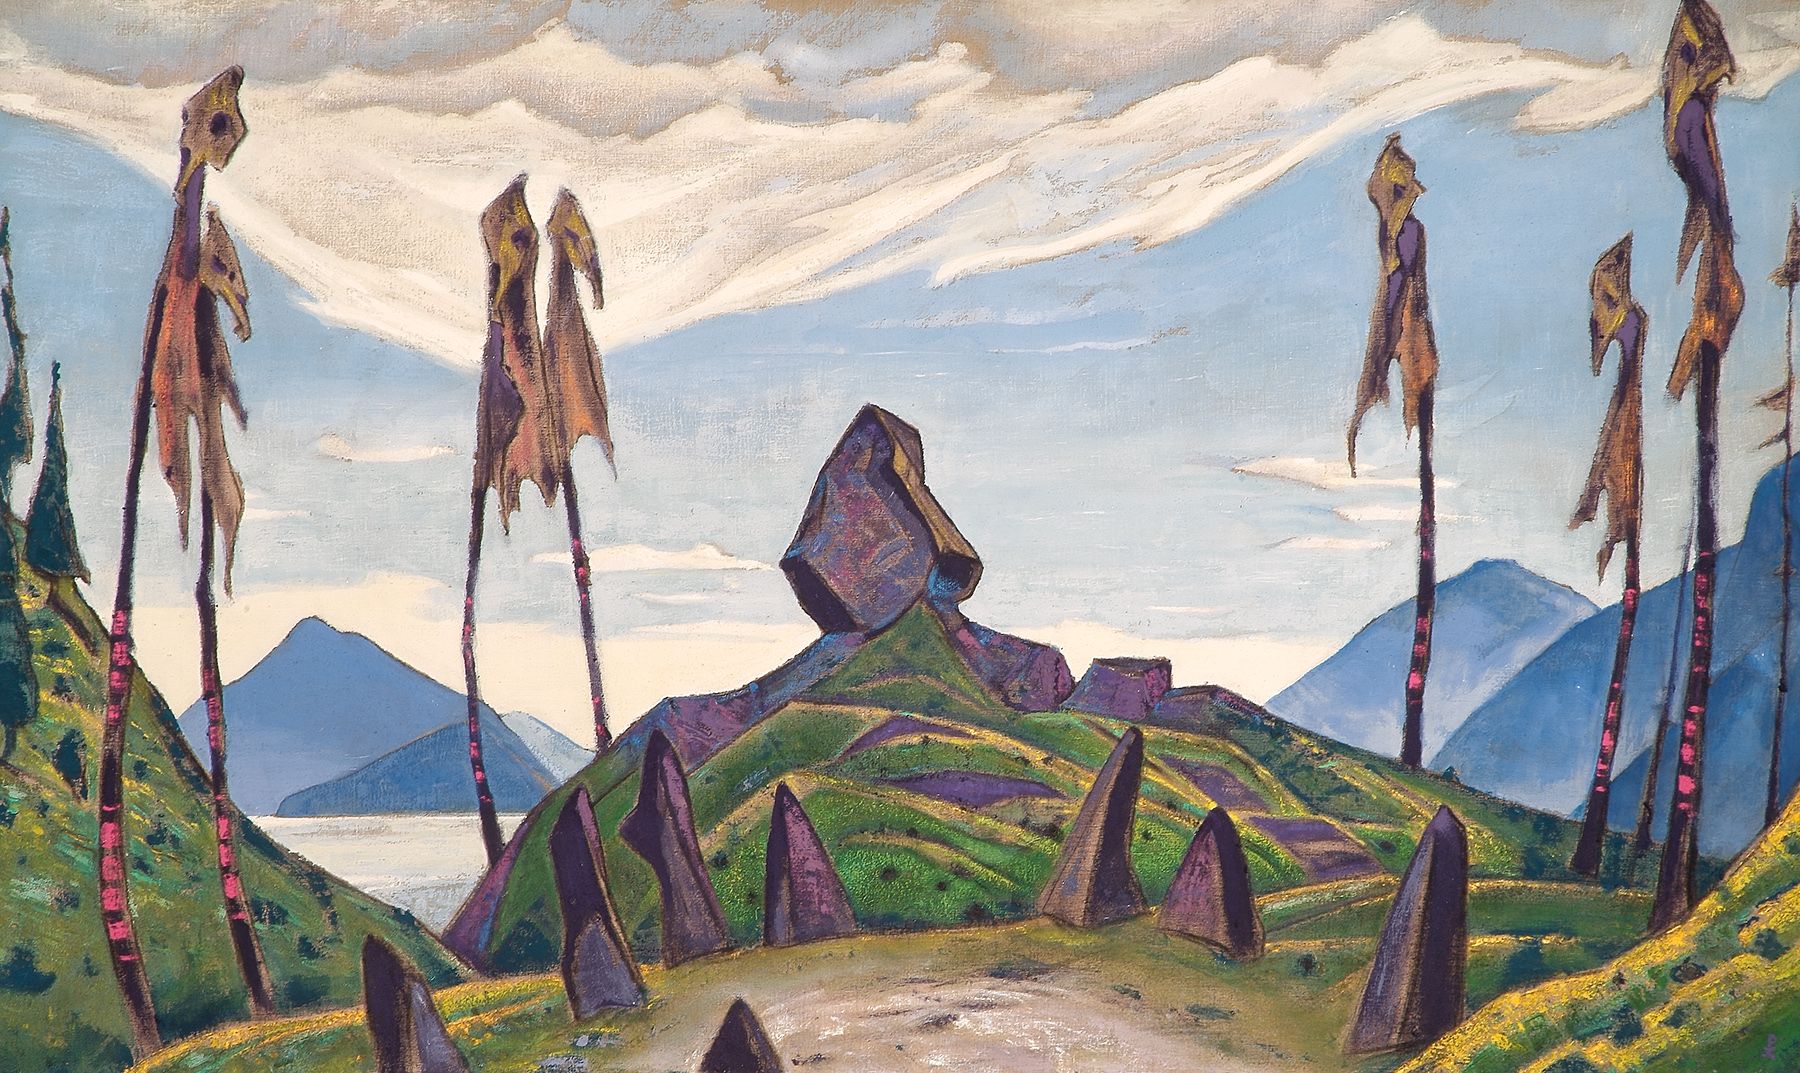 Roerich also wrote: &quot;I remember how, during the first public performance, the public hissed and shouted so much that nothing could be heard. Who knows, perhaps at that very moment the people were in a state of inner exaltation, expressing their feelings like the most primitive tribe.&quot; The idea of the primitivist purity of arts&#039; perception affected all the 20th and 21st century art. // The decorations for the first &quot;Rite of spring&quot;, 1913